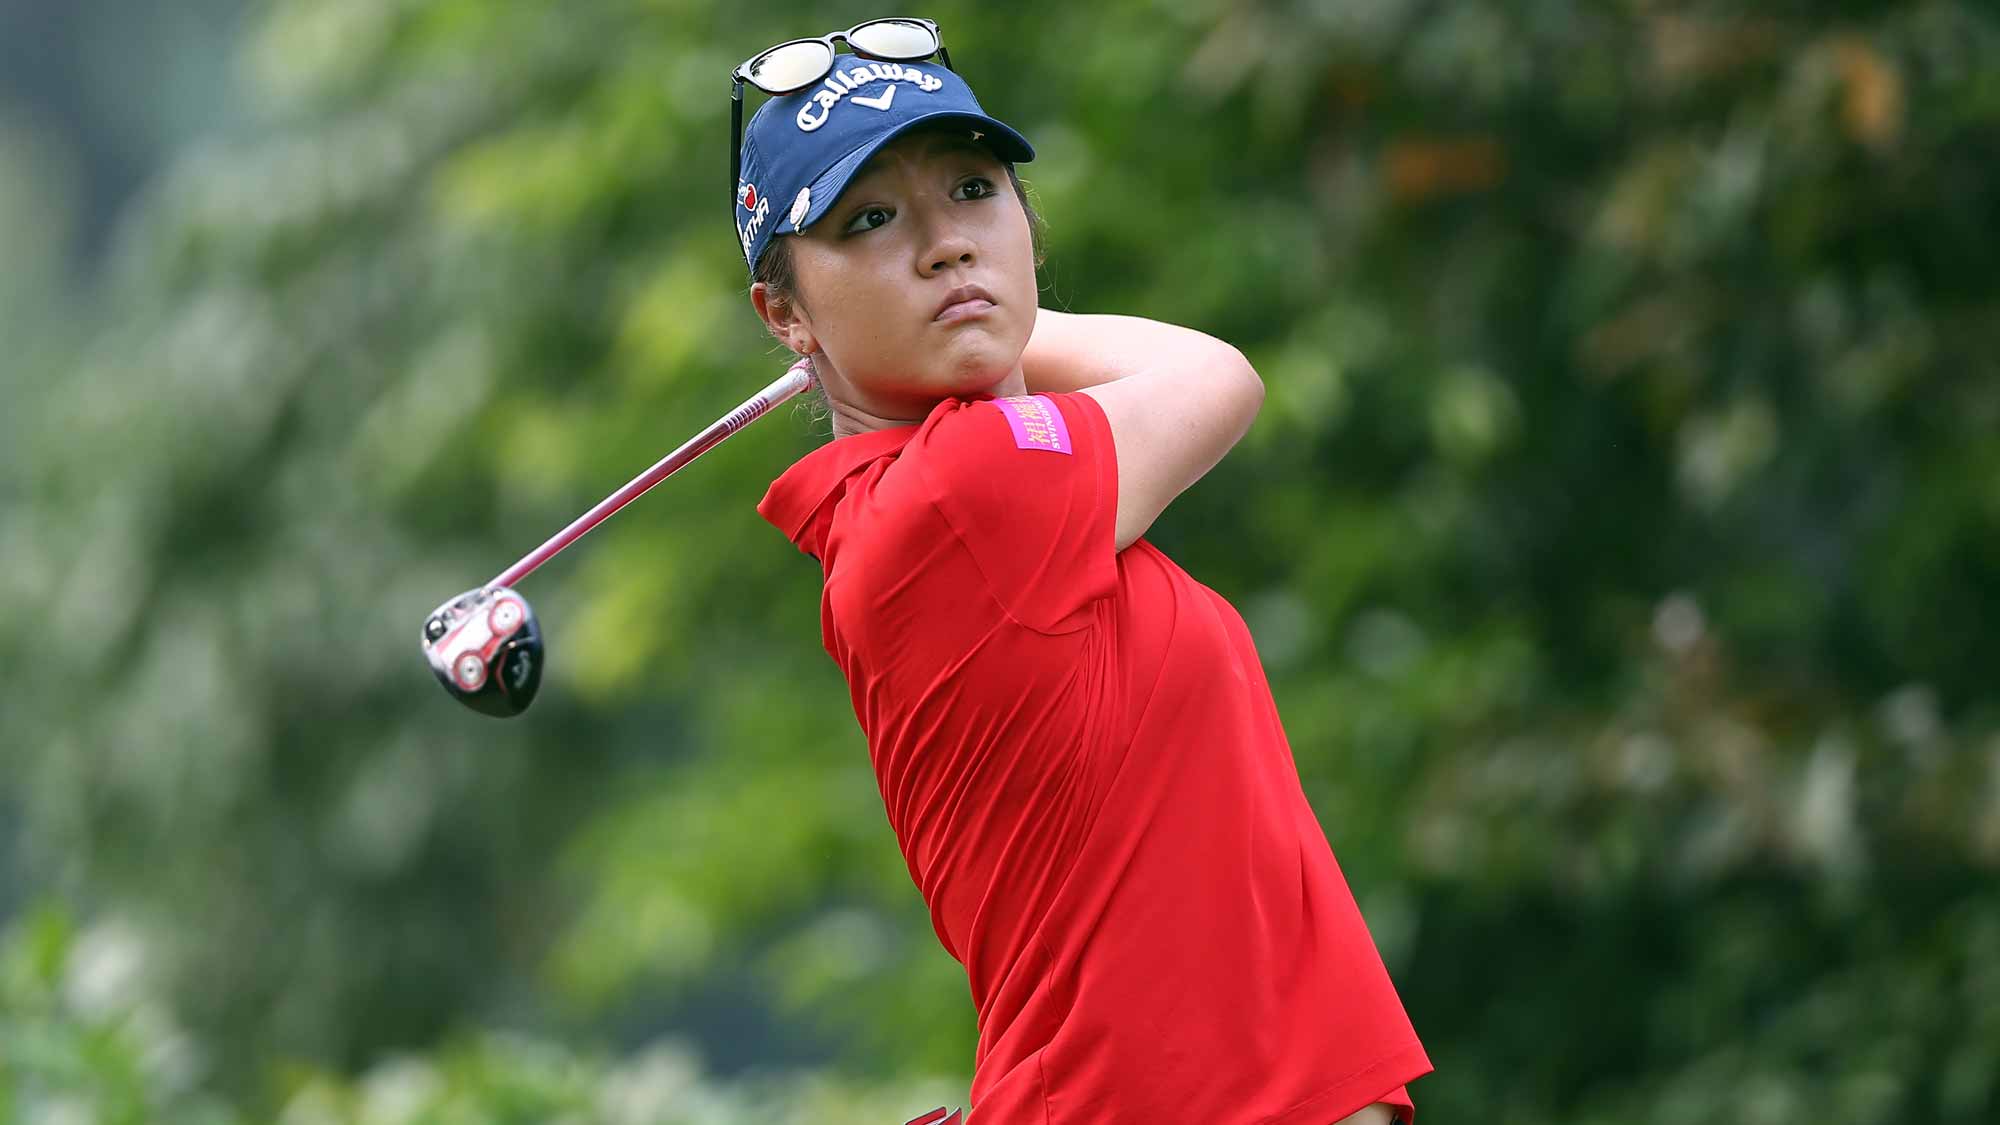  Lydia Ko of New Zealand watches her tee shot on the 4th hole during the final round of the Sime Darby LPGA Tour at Kuala Lumpur Golf & Country Club